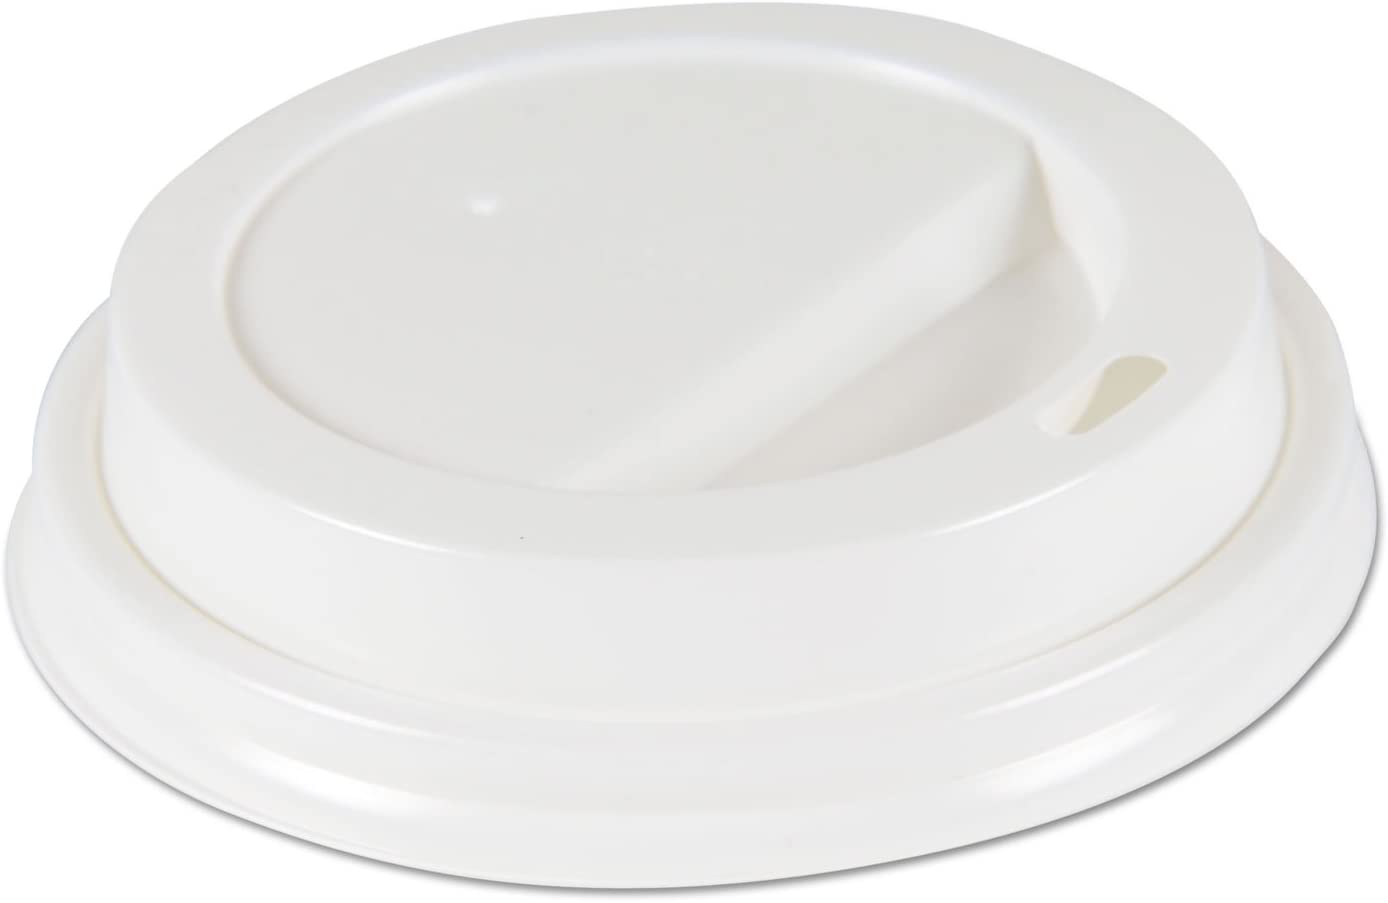 LIDS-HOT CUP FOR 10-20 OZ CUPS 
WHITE (1000/CS)